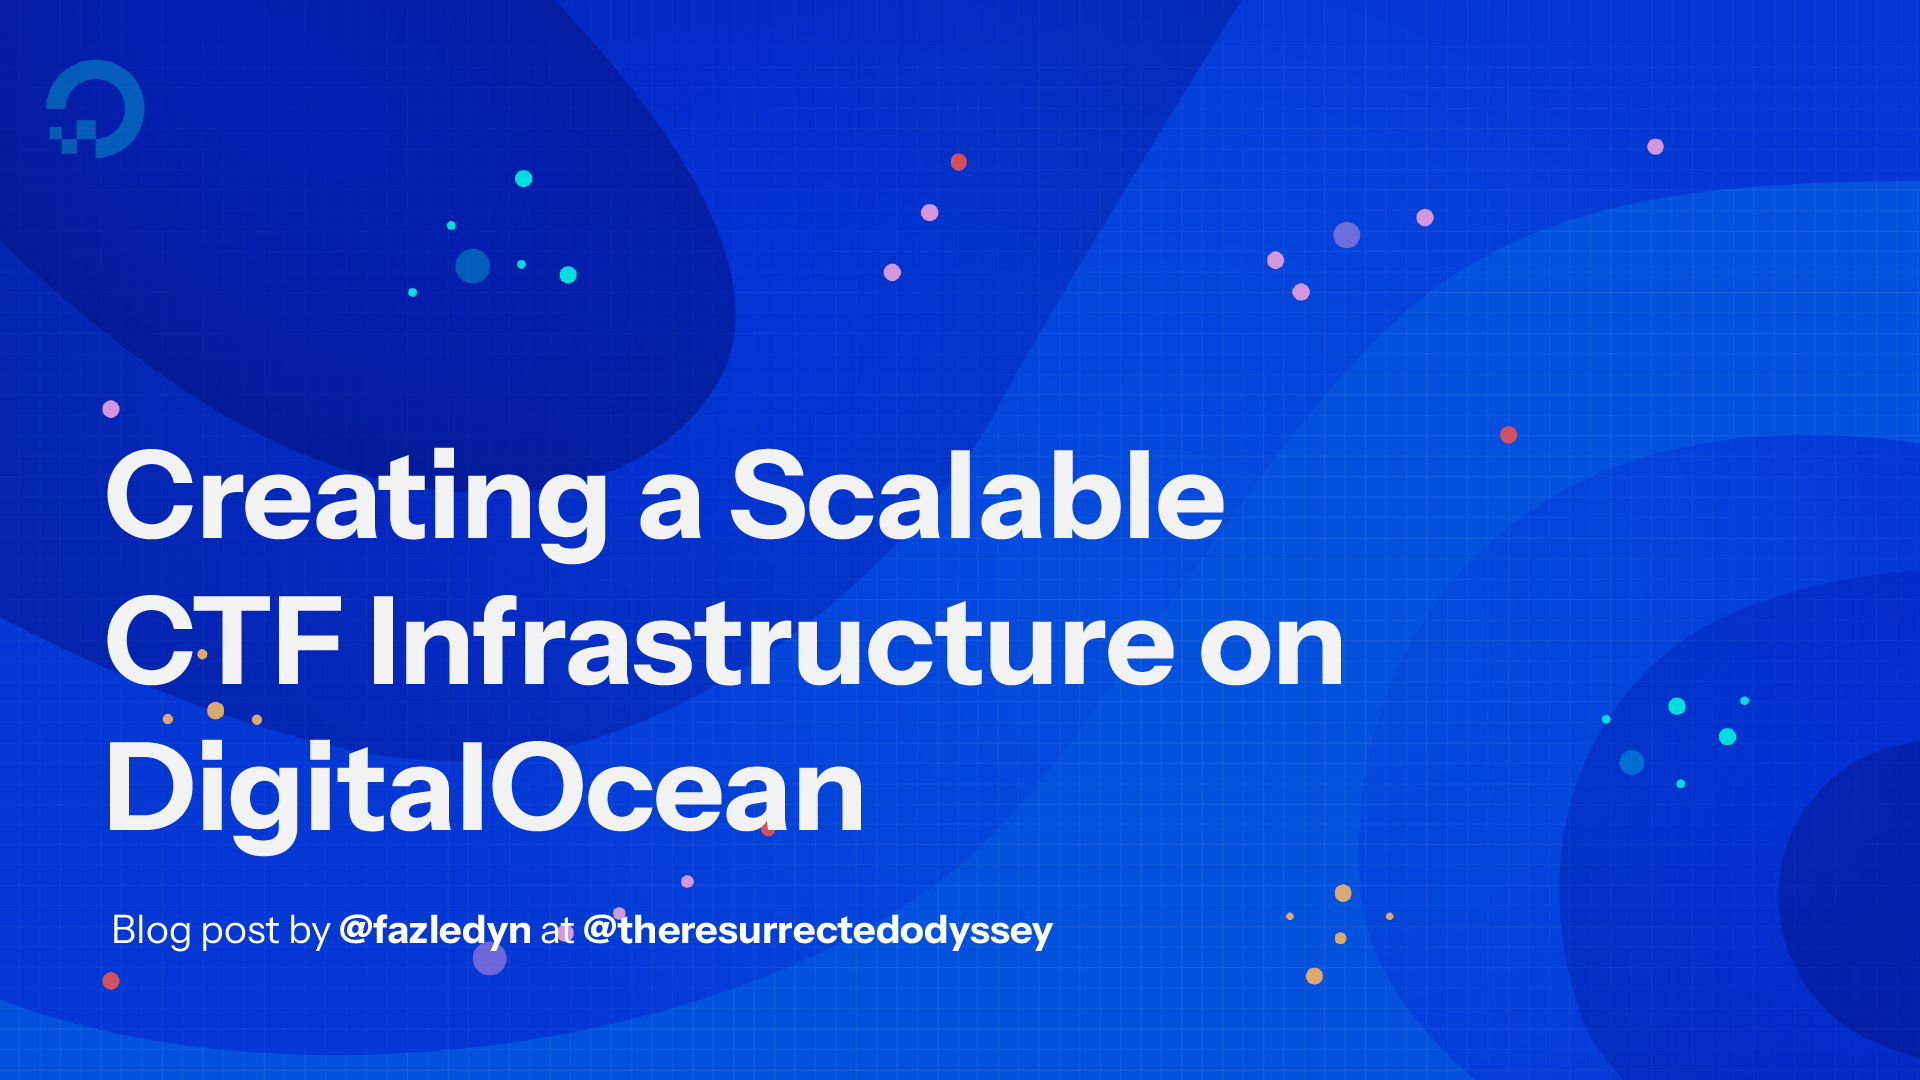 Creating a Scalable CTF Infrastructure on DigitalOcean